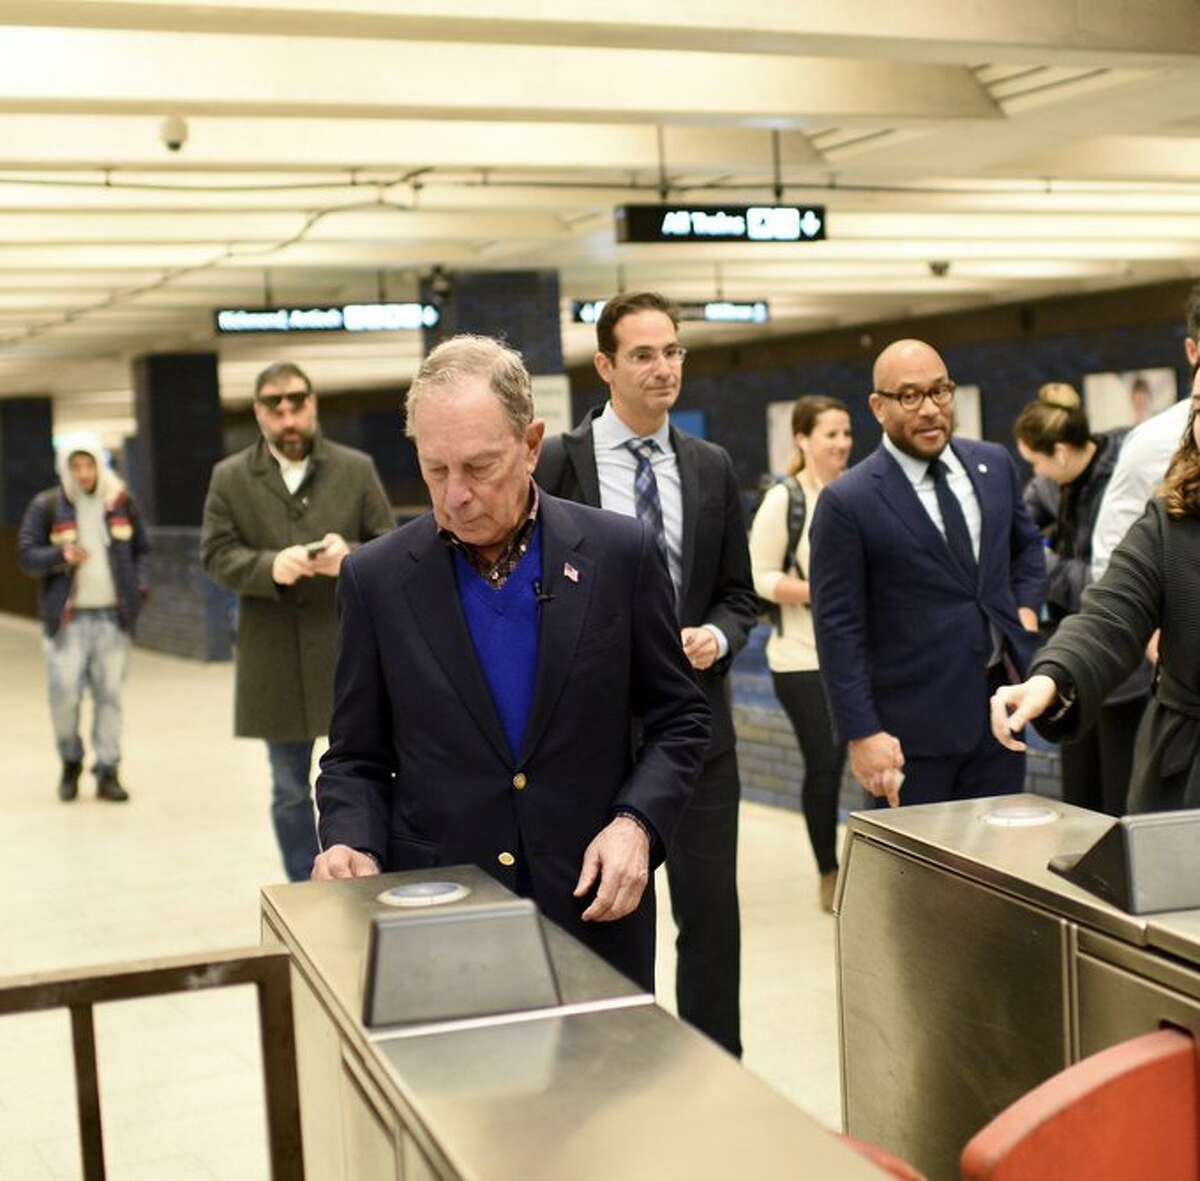 Michael Bloomberg rides BART on Friday, January 17, 2020.